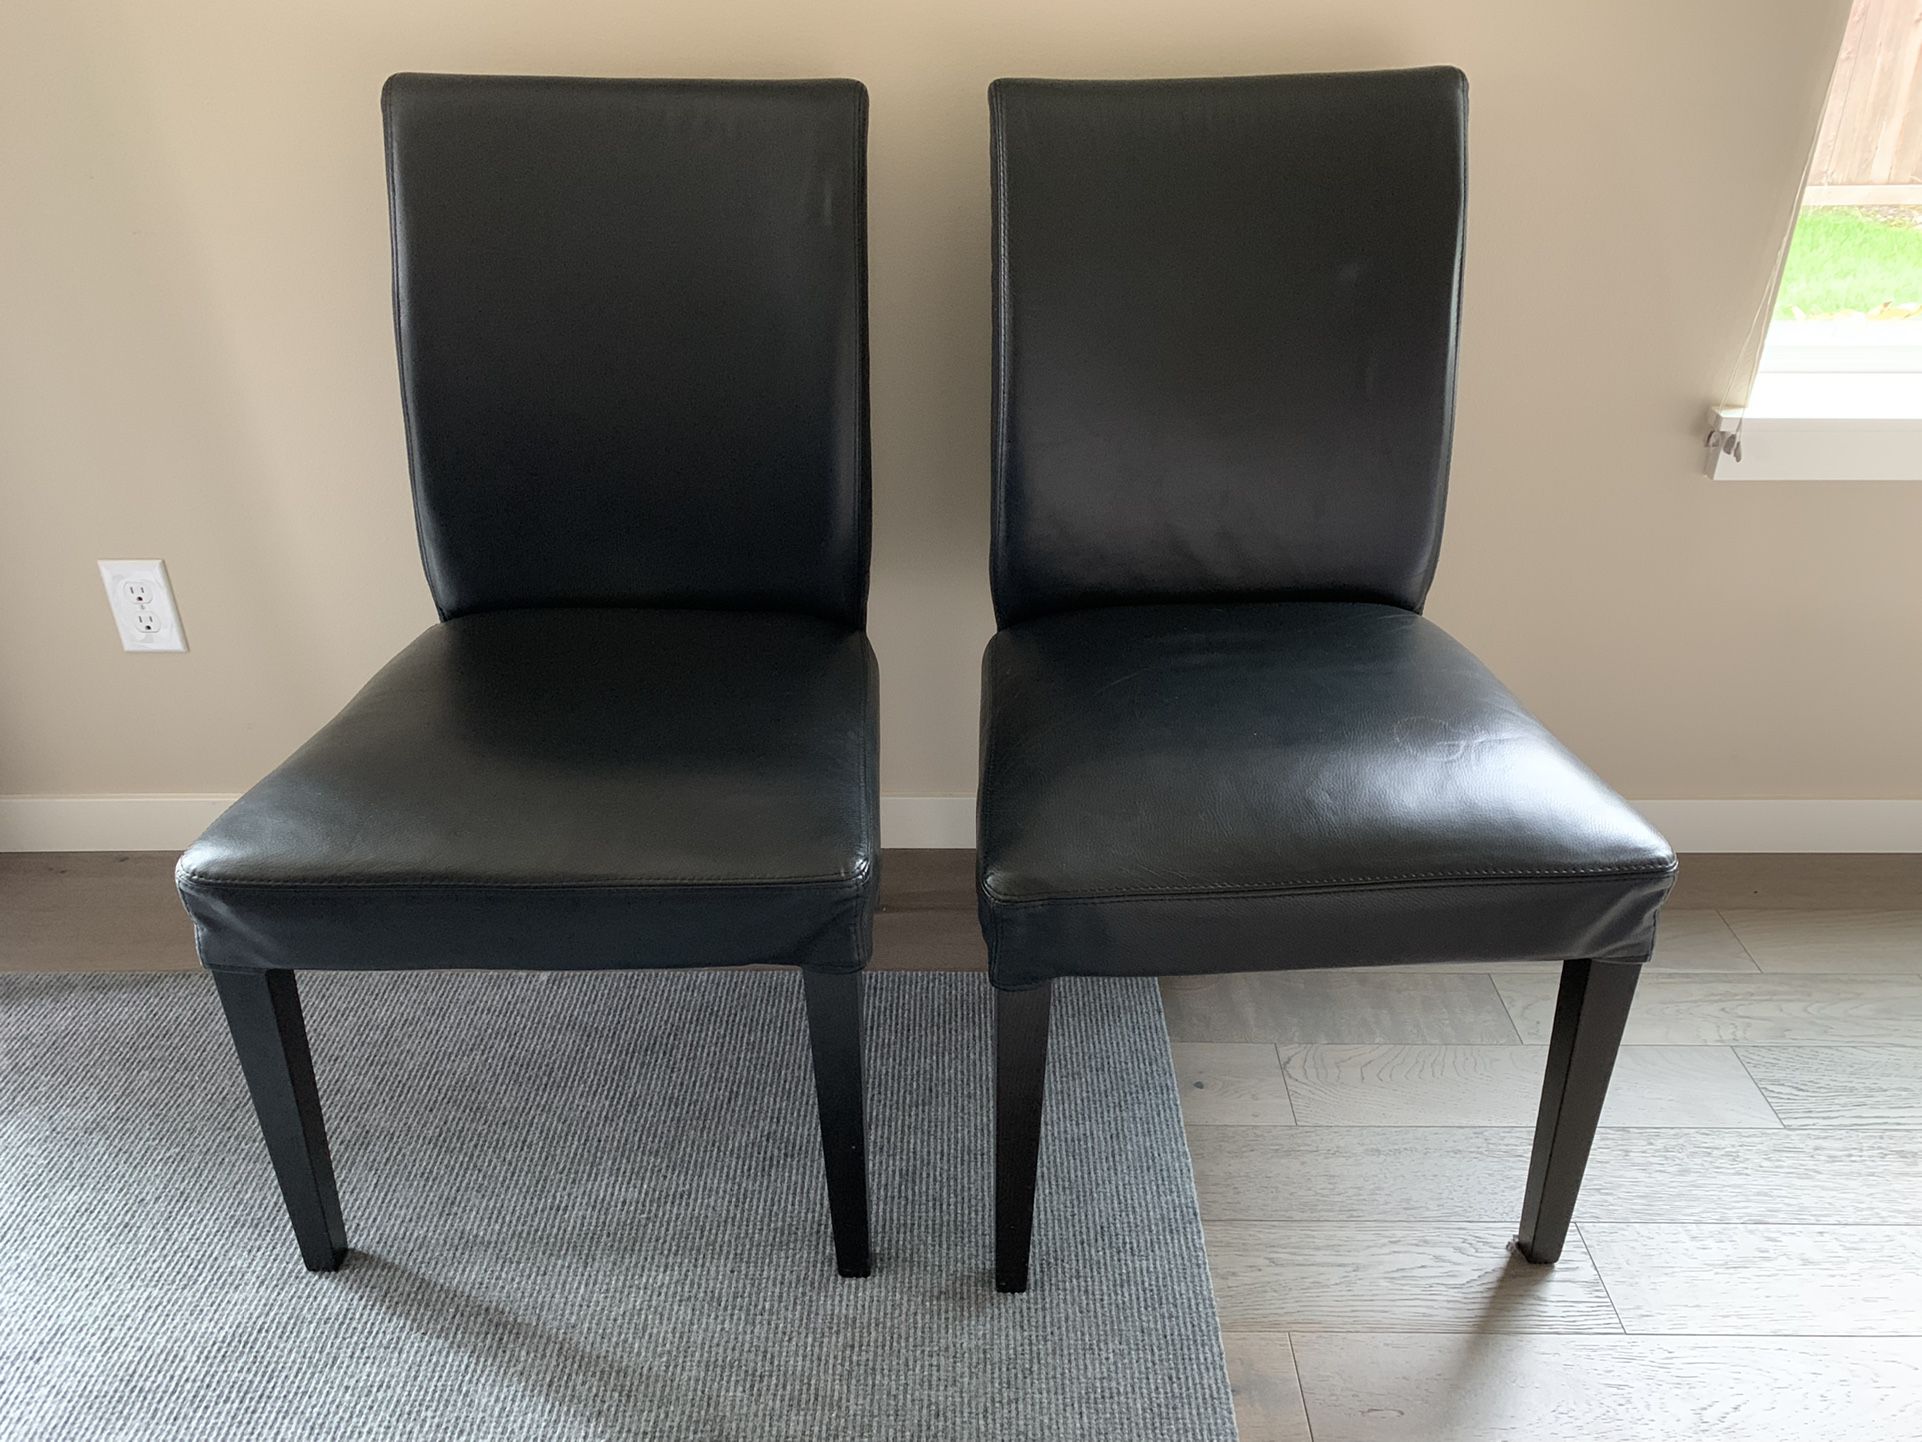 IKEA - HENRIKSDAL Leather Chairs (pair)